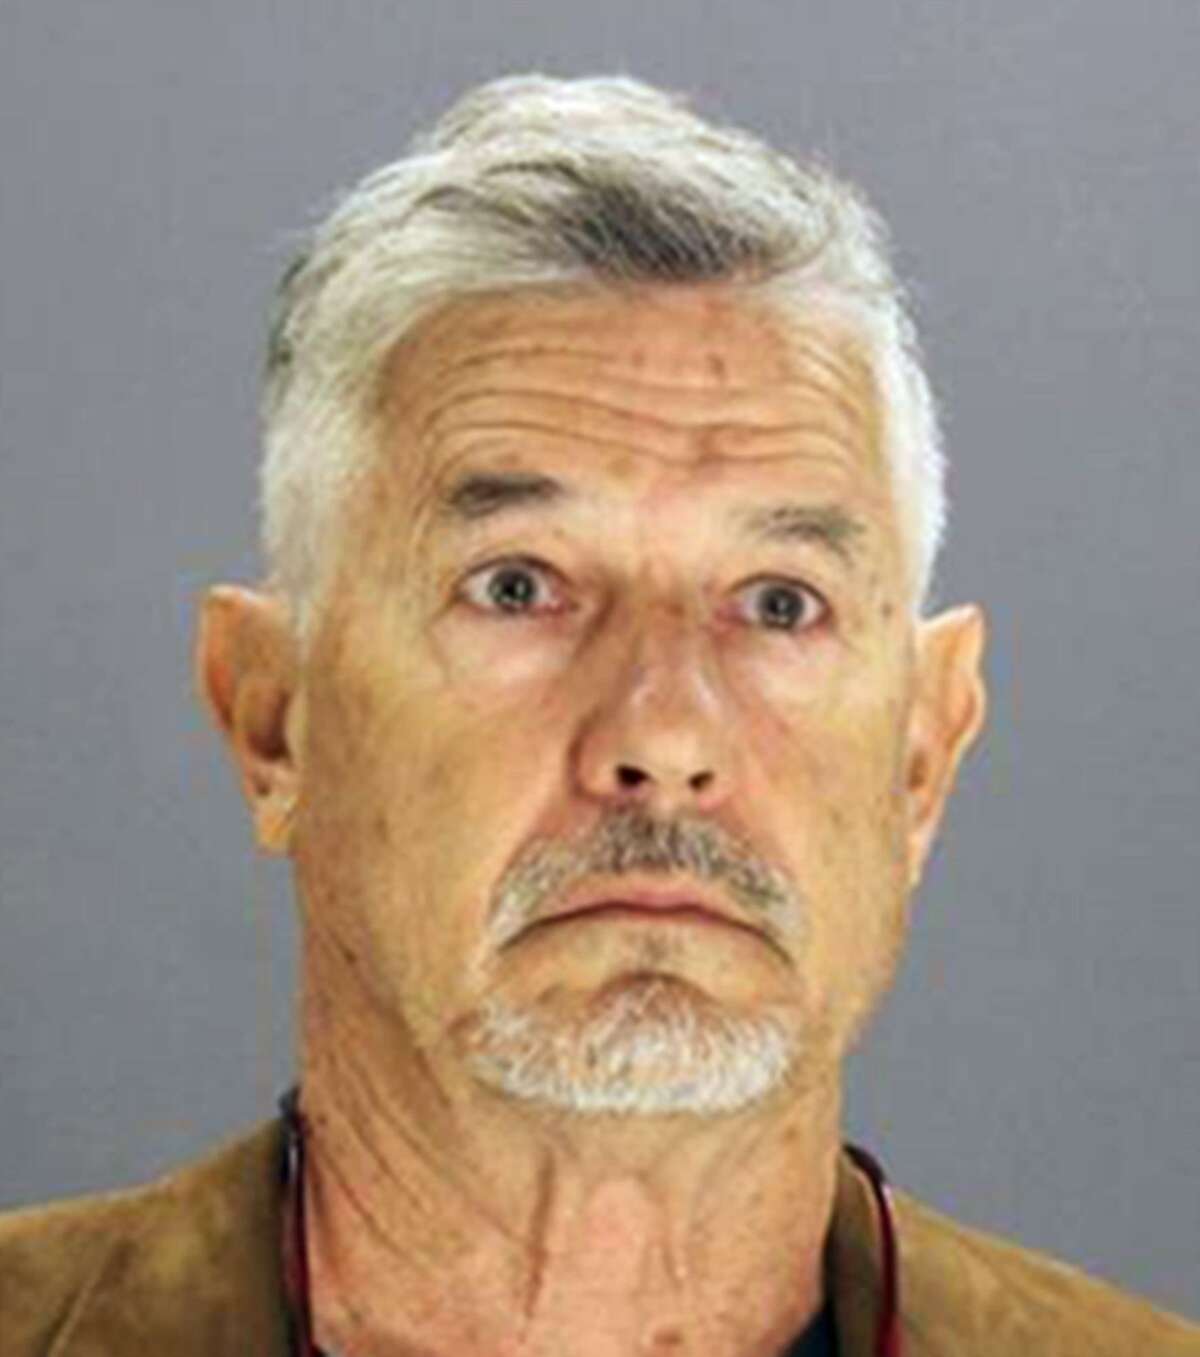 This photo provided by the Dallas County Sheriff's Department shows John Timothy Schooley, one of the designers of a Kansas water park slide that decapitated a 10-year-old boy in 2016. Schooley was arrested by federal authorities late Monday, April 2, 2018, in Dallas. Schooley and Jeffrey Henry, a co-owner of Texas-based Schlitterbahn Waterparks and Resorts, were indicted last week by a grand jury in Kansas. Schooley will be held in Dallas pending his arraignment and extradition to Kansas on charges that include second-degree murder. (Dallas County Sheriff's Department via AP)